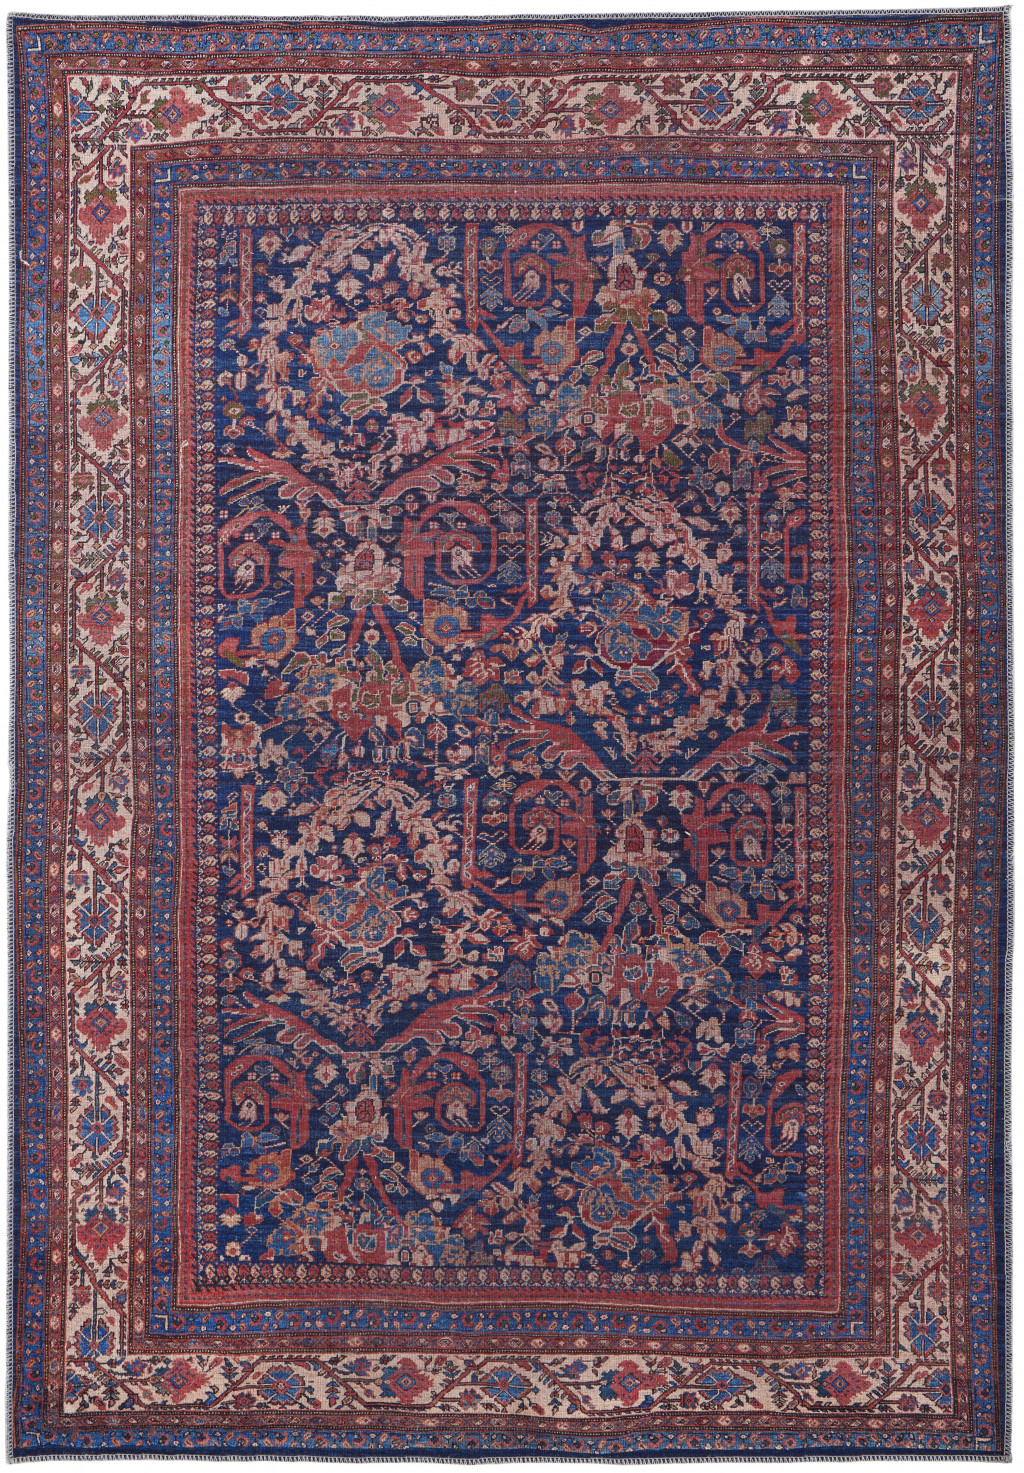 2' X 3' Red Blue And Tan Floral Power Loom Area Rug-515111-1